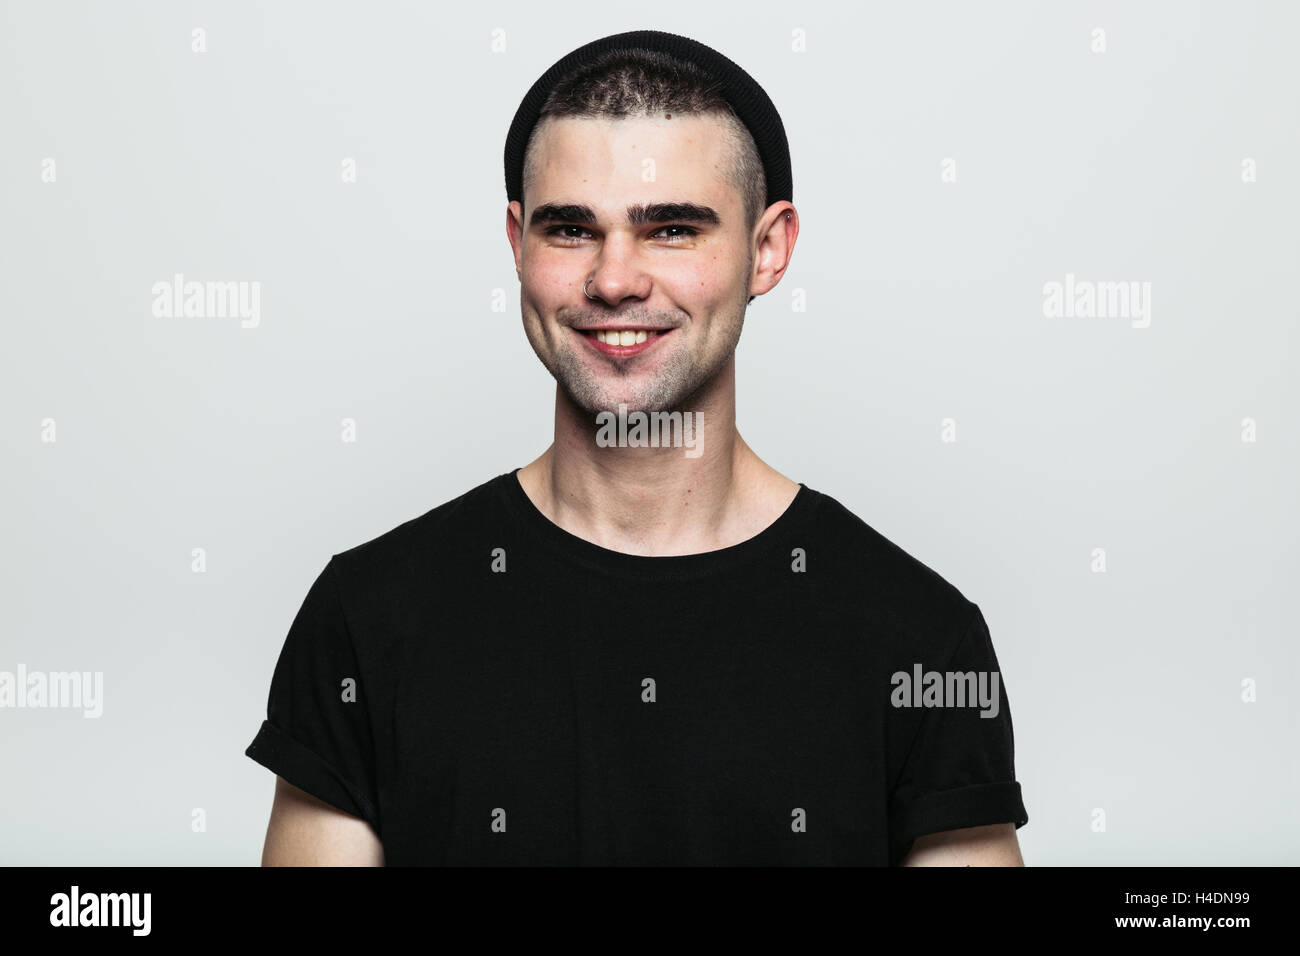 Portrait of young toothy smiling man Stock Photo